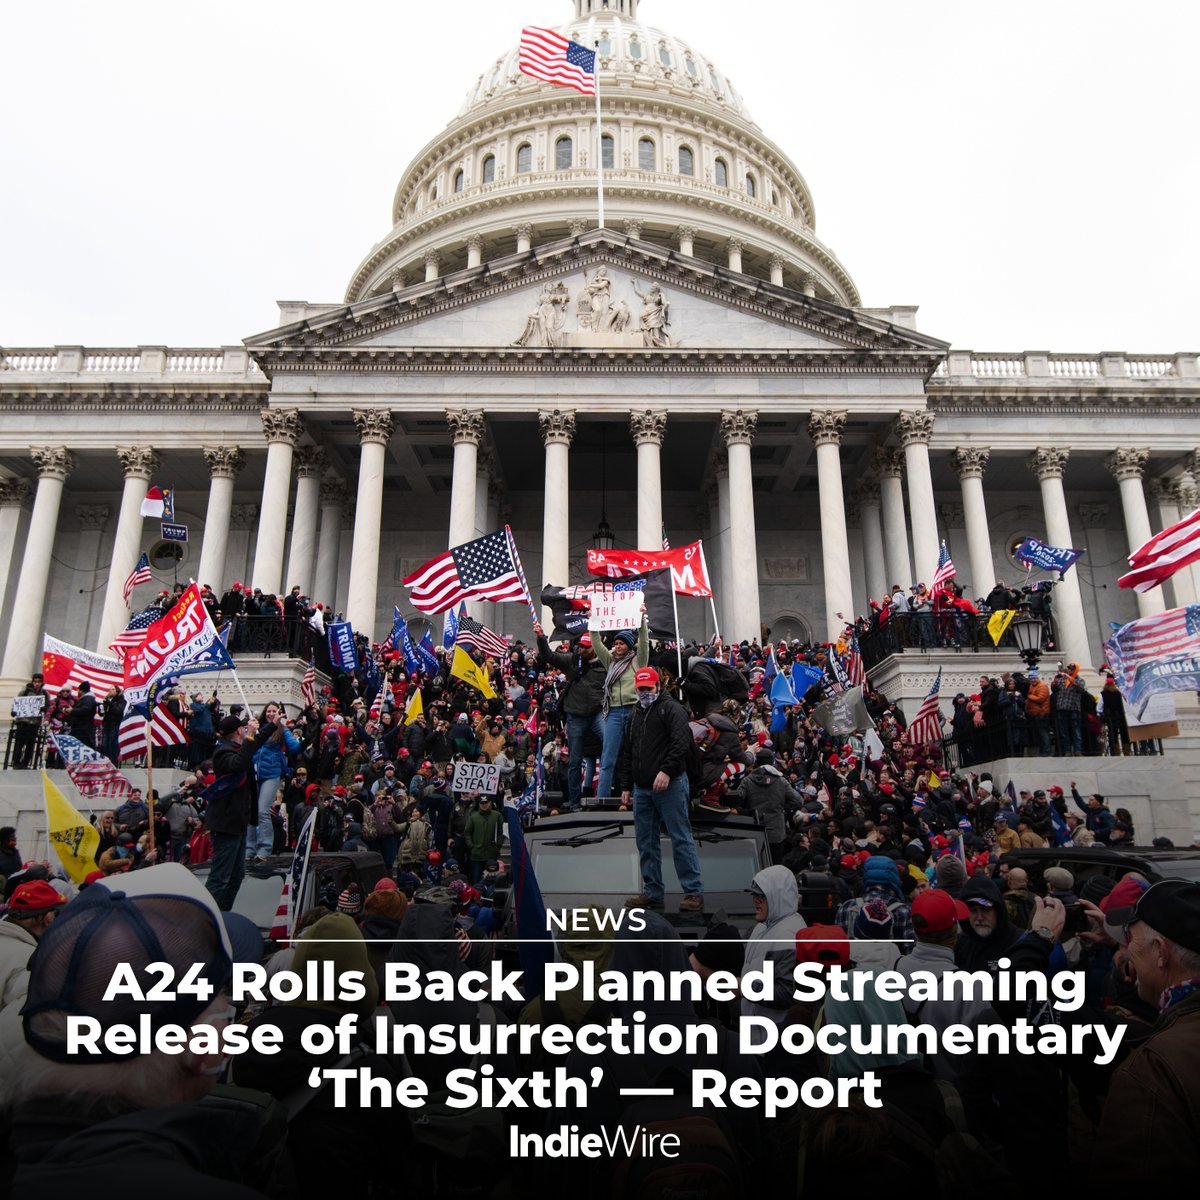 A24 had planned on making insurrection documentary “The Sixth” widely available to stream on Prime Video for existing customers, but now, they seem to be rolling back that decision, only making it available to rent. More details: trib.al/gy84ZXq